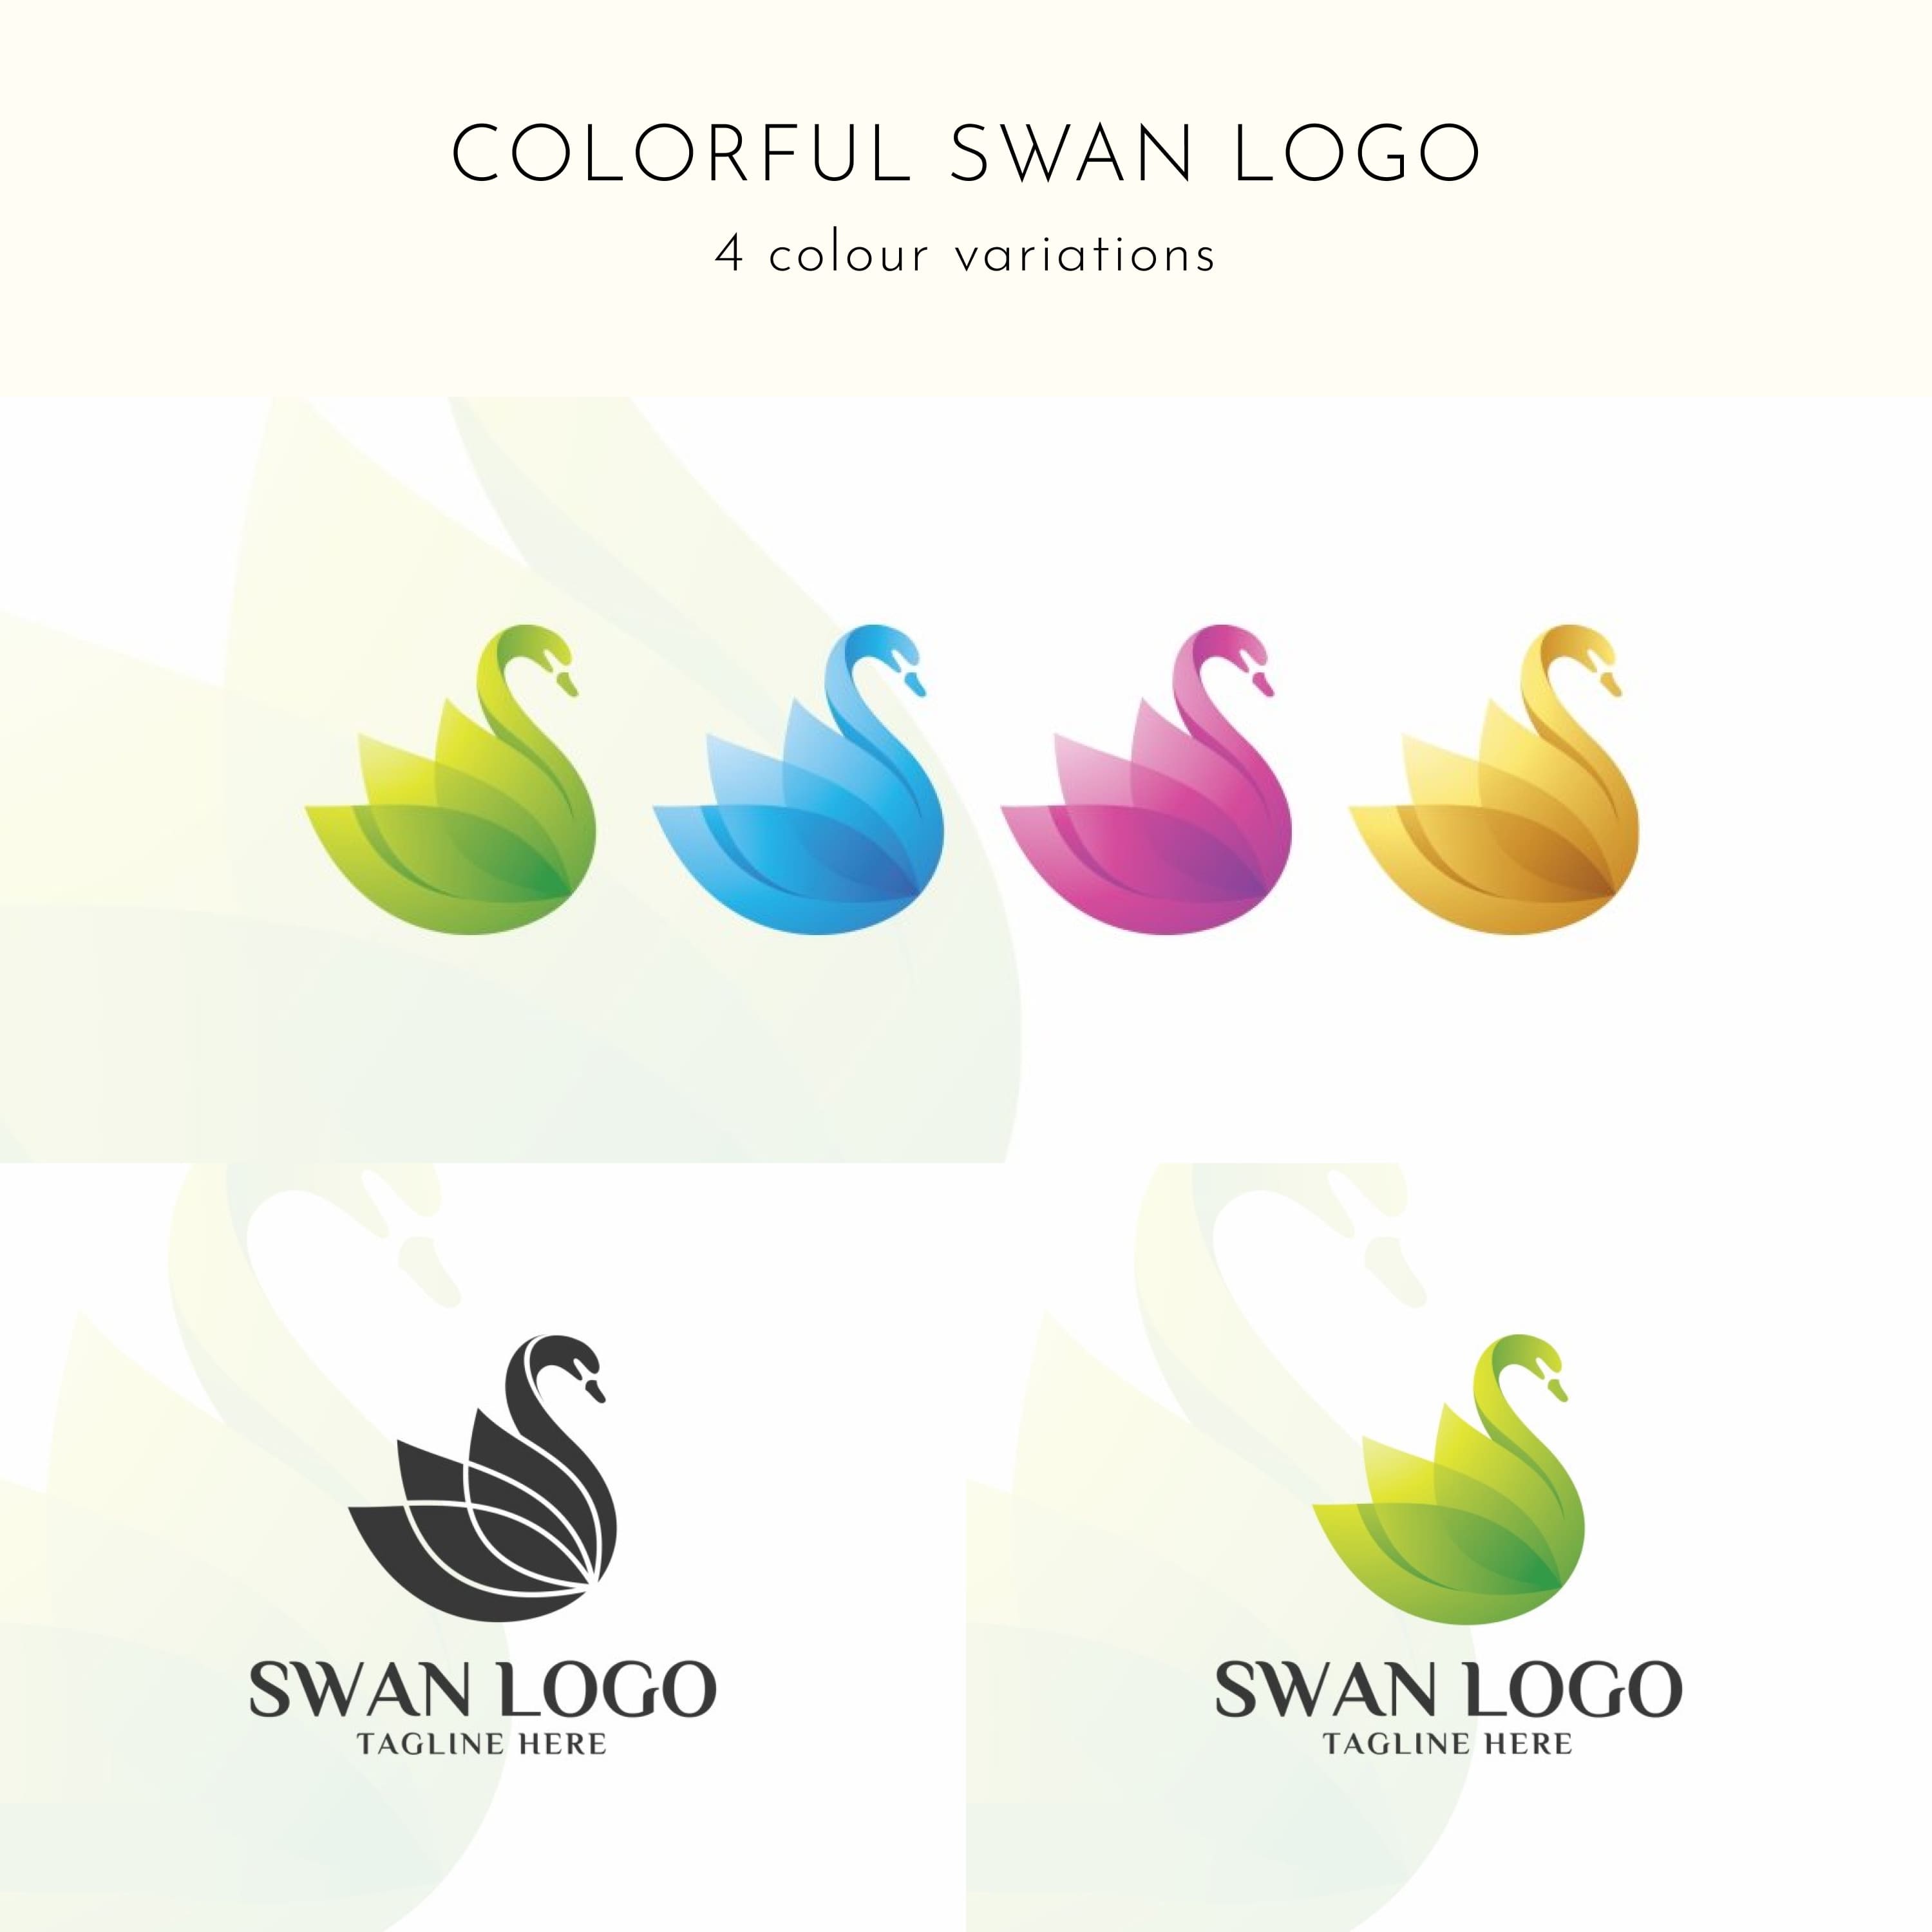 Colorful Swan Logo cover.